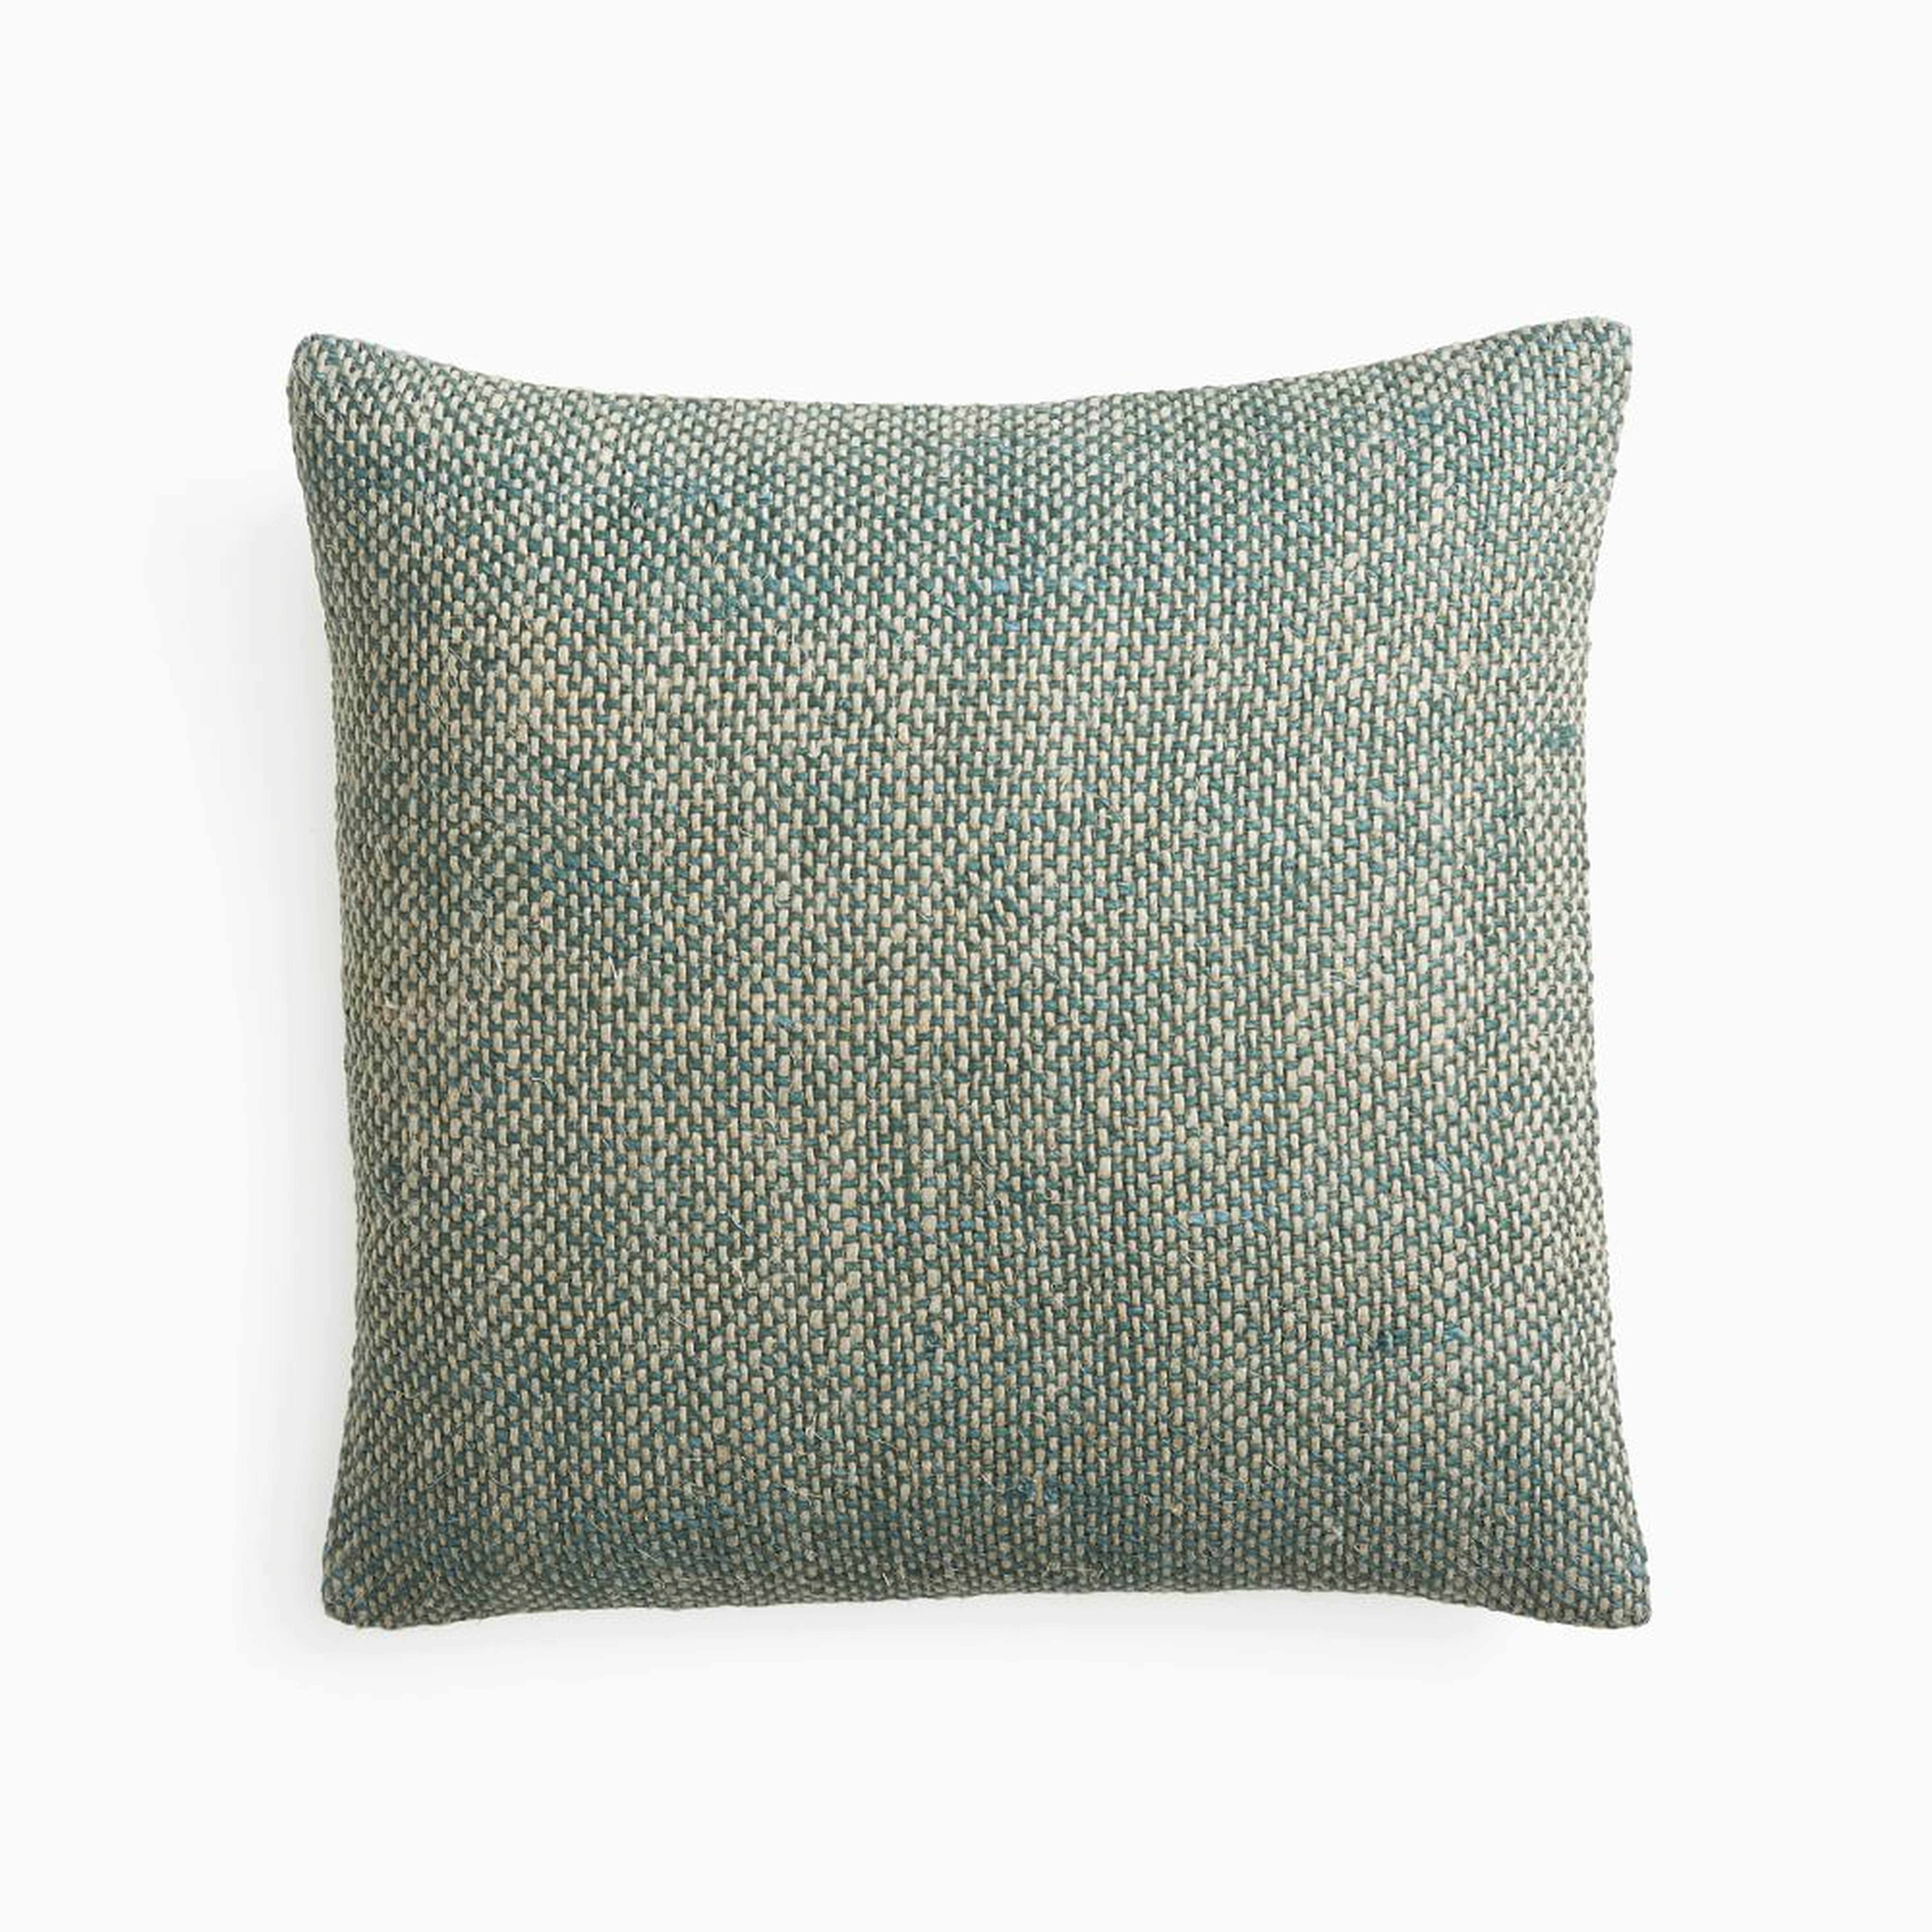 Two Tone Chunky Linen Pillow Cover, 20"x20", Light Silver Pine, Set of 2 - West Elm